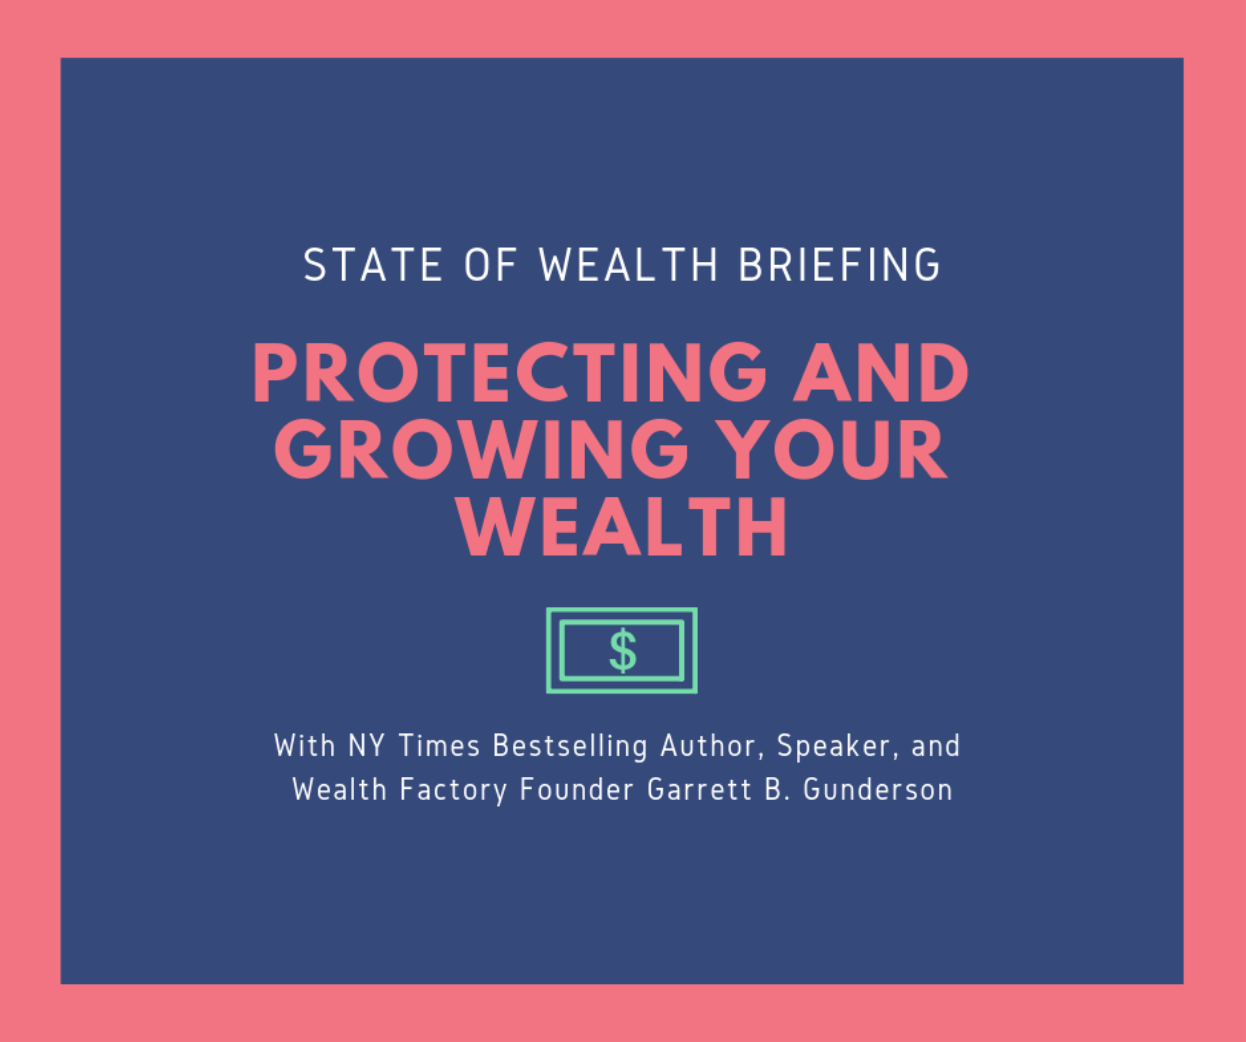 State of Wealth Briefing: "Protecting and Growing Your Wealth"